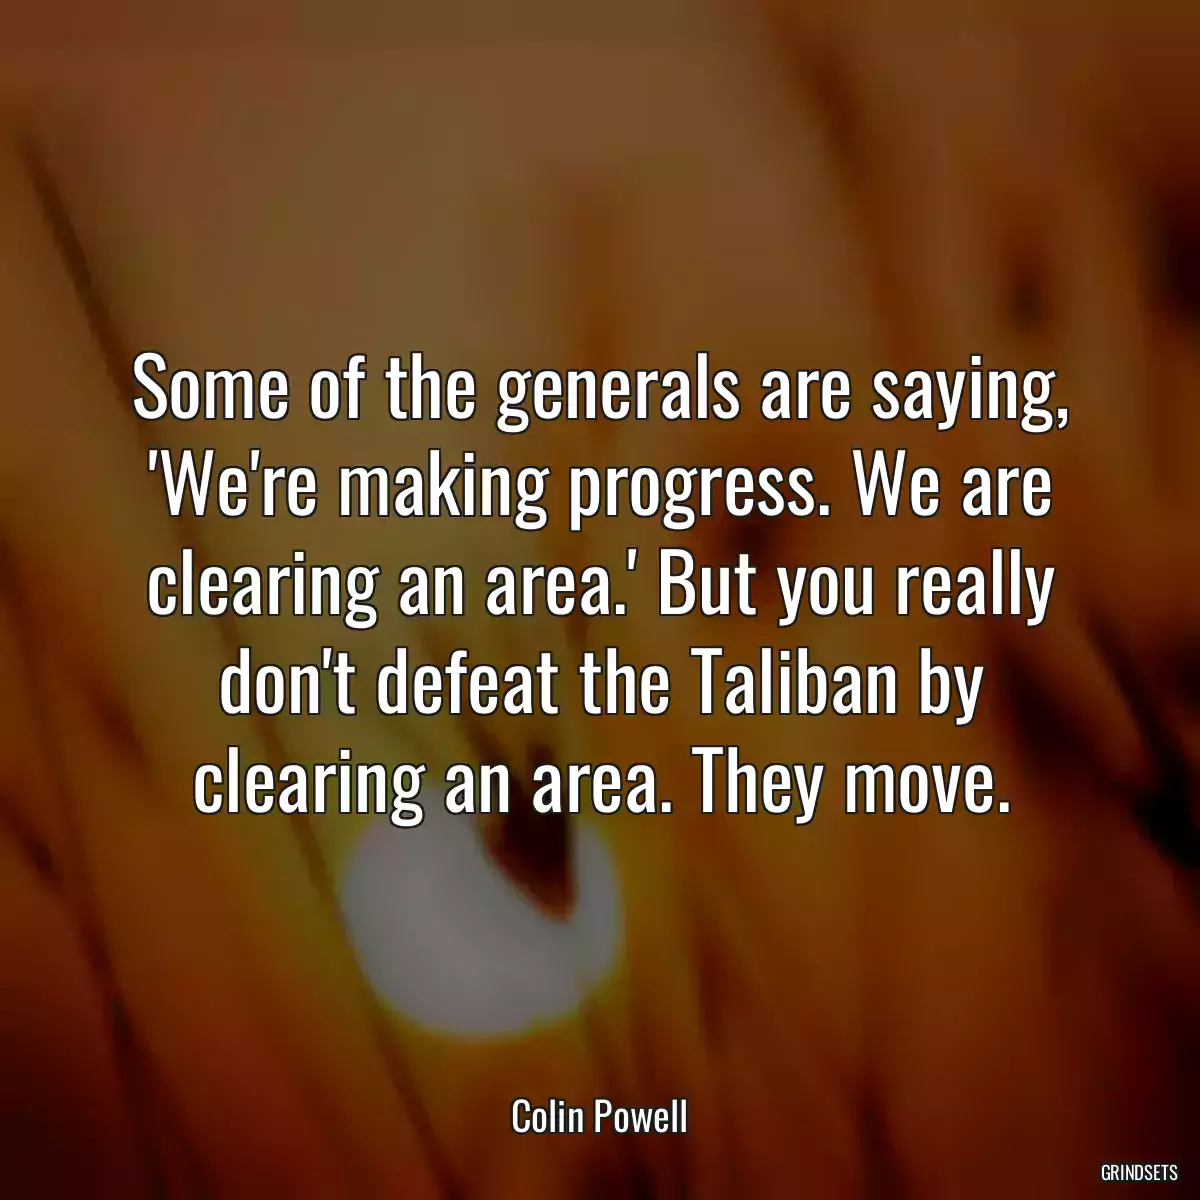 Some of the generals are saying, \'We\'re making progress. We are clearing an area.\' But you really don\'t defeat the Taliban by clearing an area. They move.